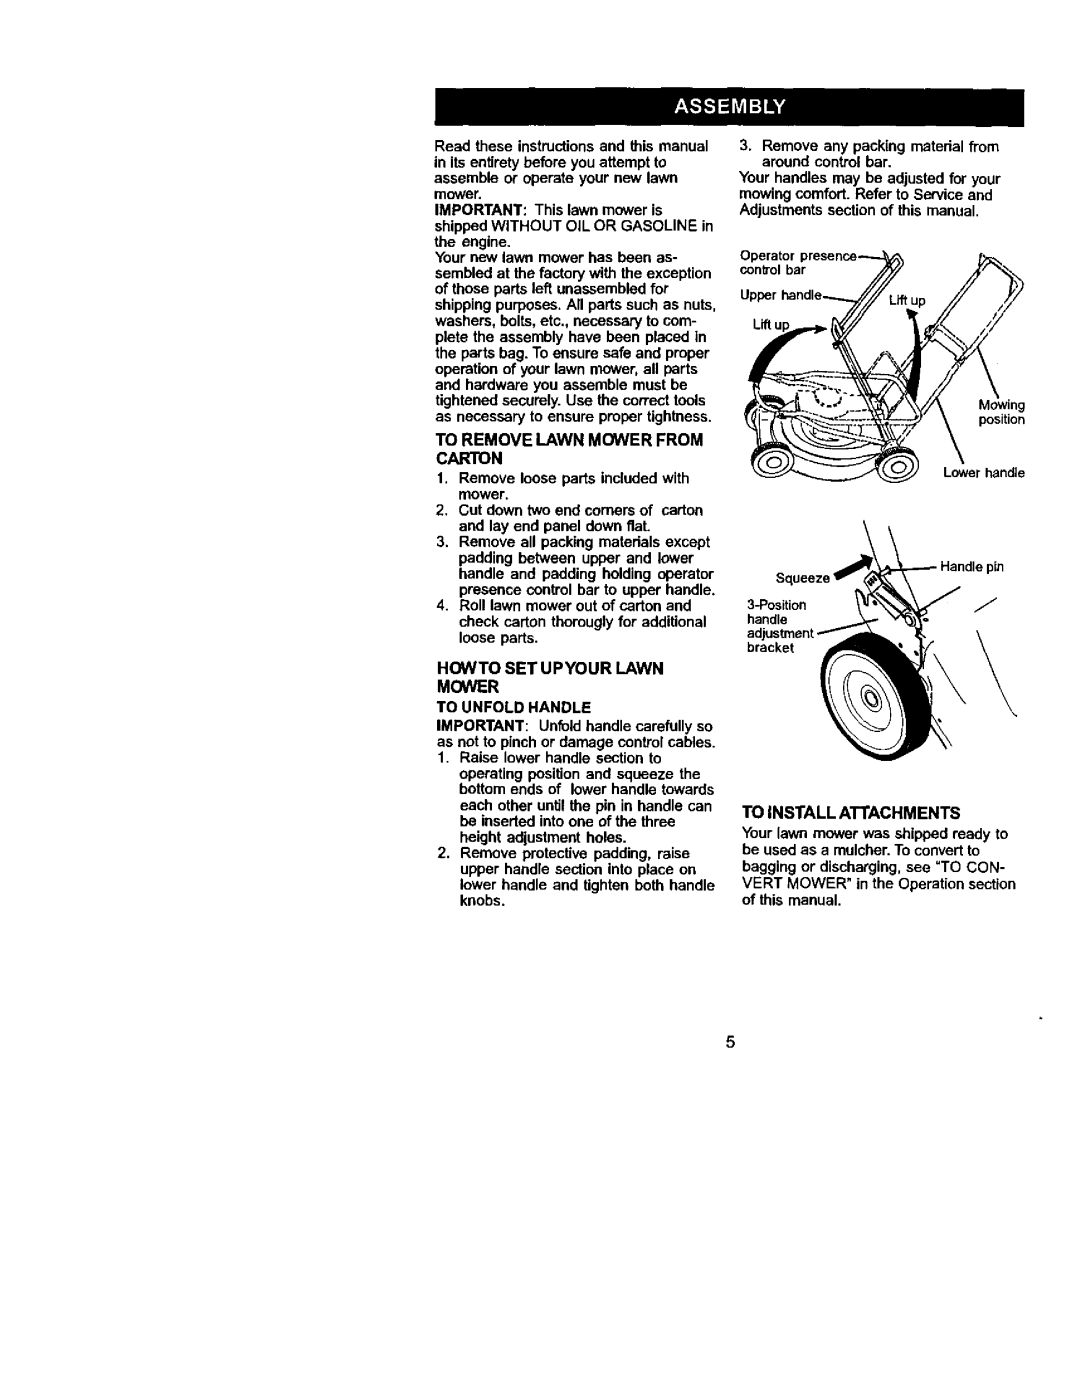 Craftsman 917.388732 owner manual the engine, To Remove Lawn Mower From Carton 